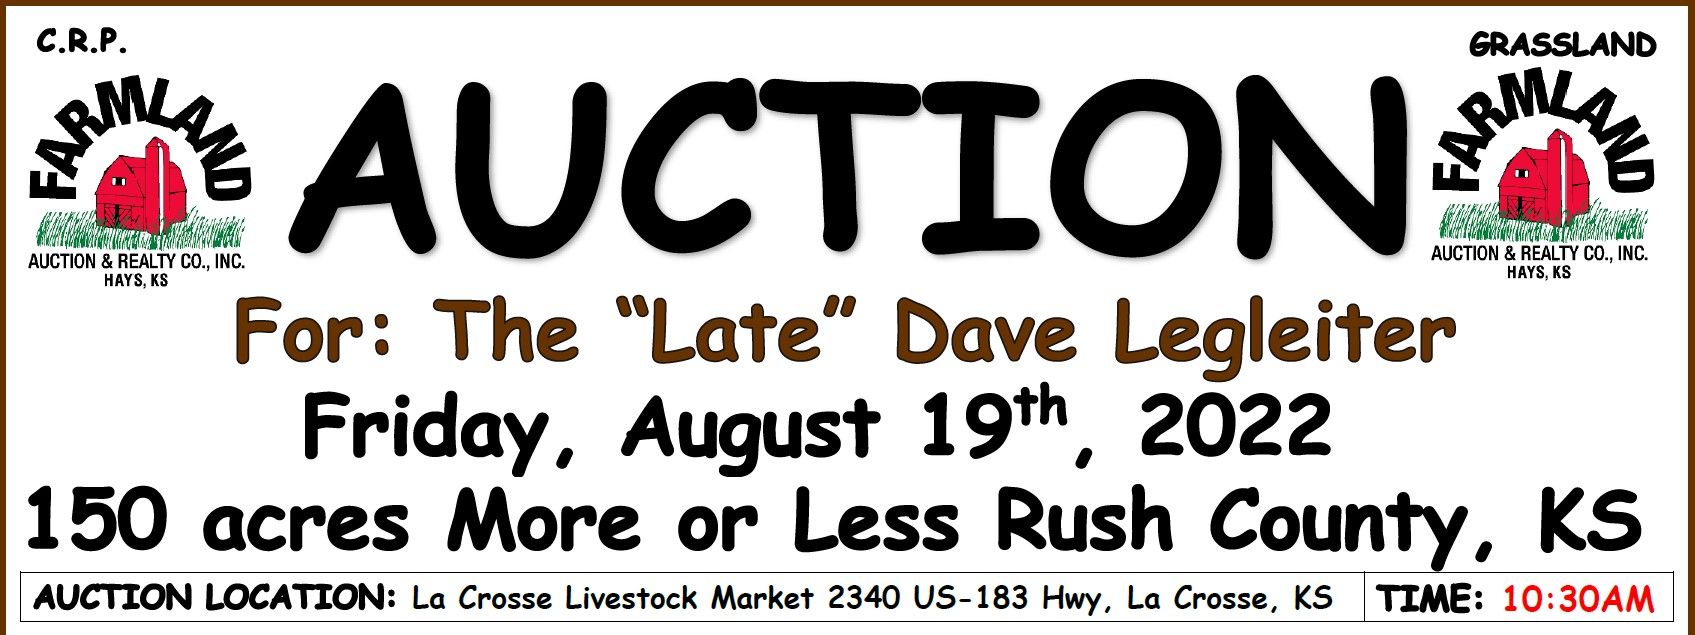 Auction flyer for Auction : 150 acres +/- Rush County, KS